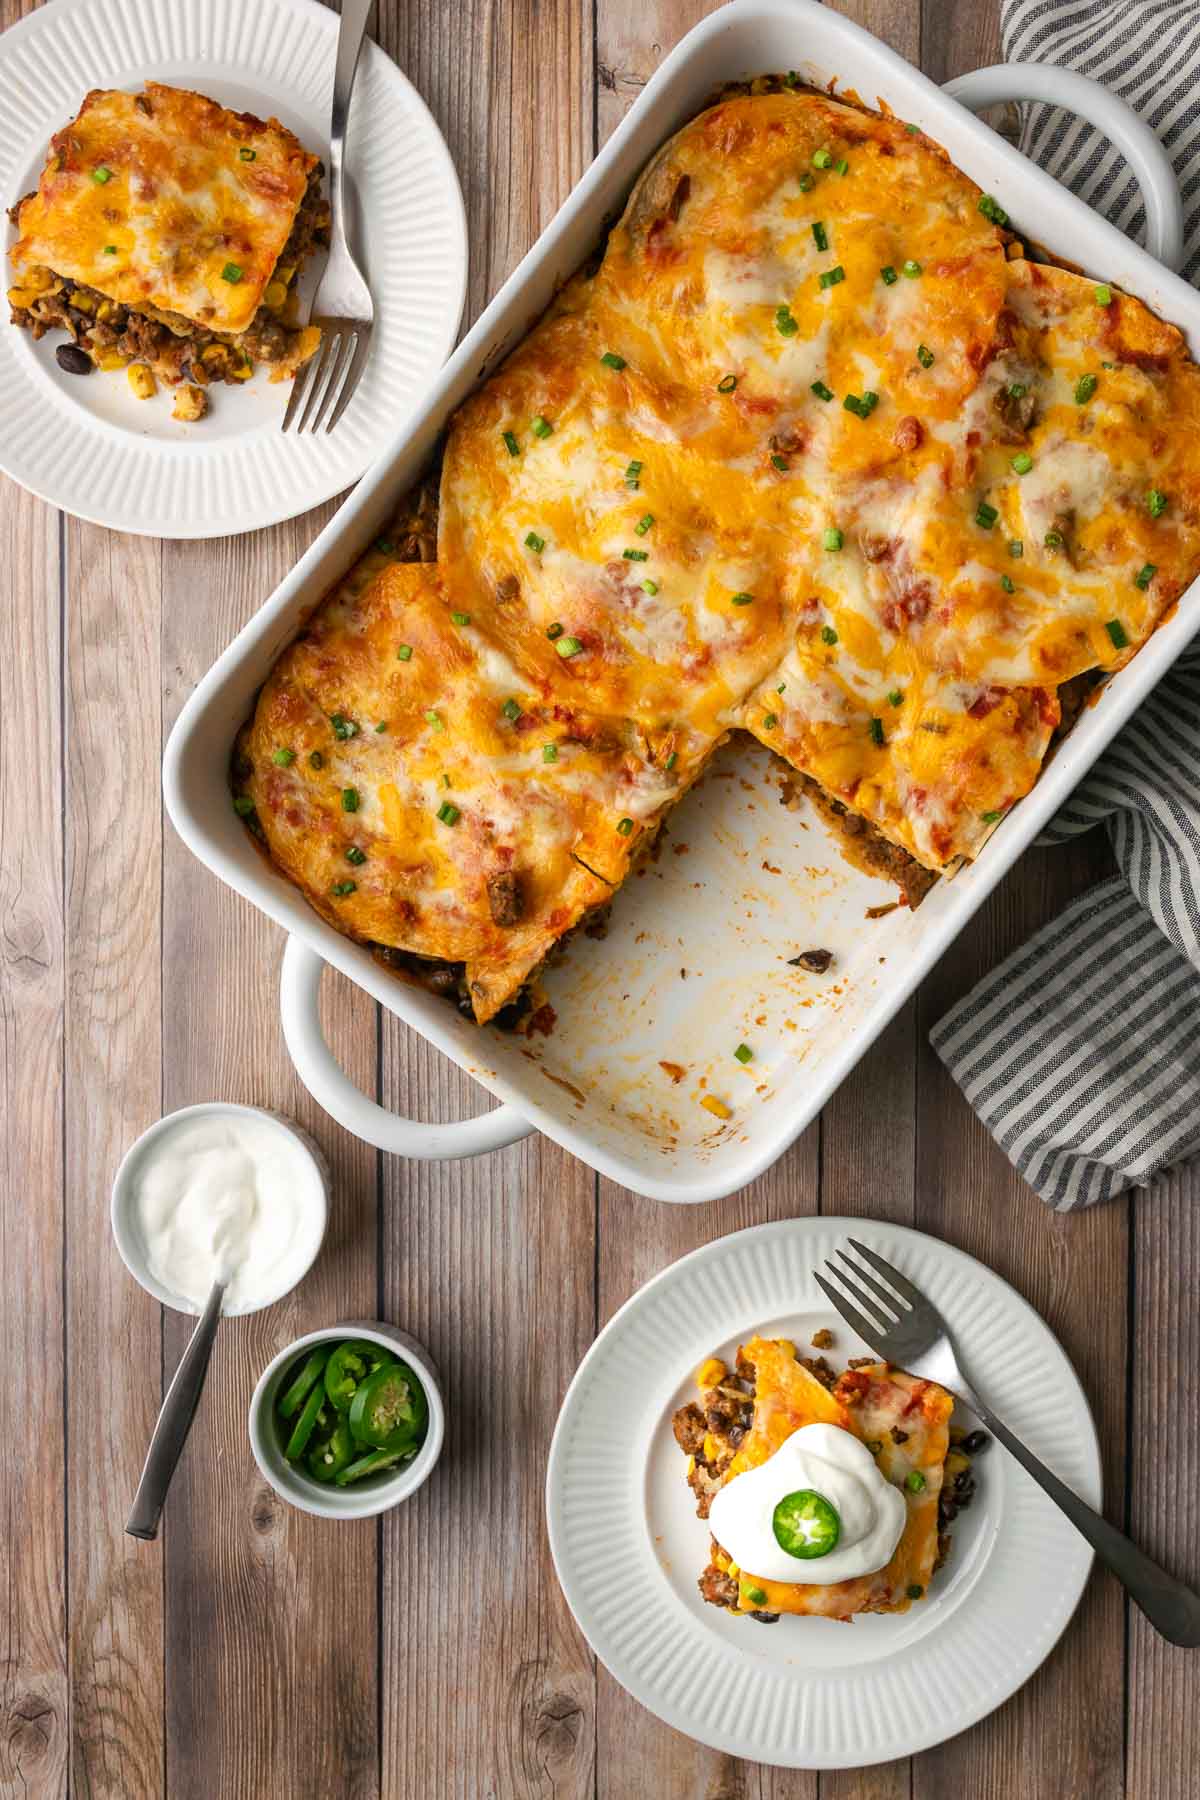 Tortilla Lasagna casserole shown with a slice taken out and plated.